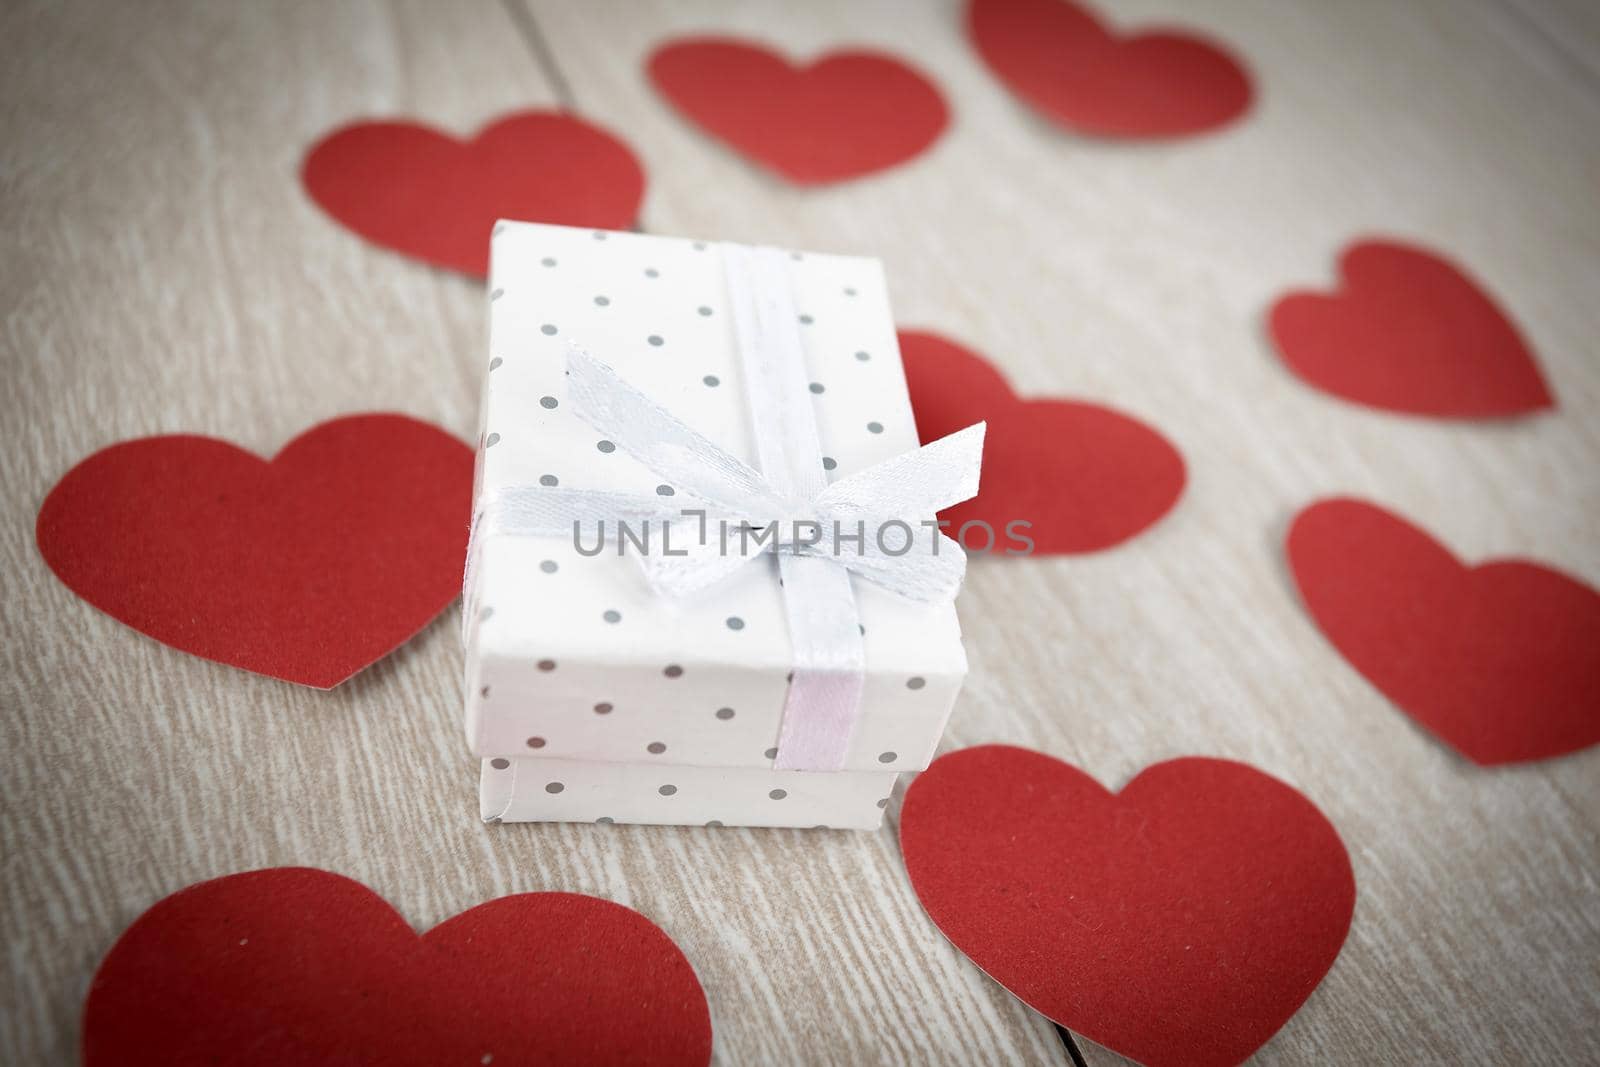 red hearts and gift box on light wooden background. photo with copy space